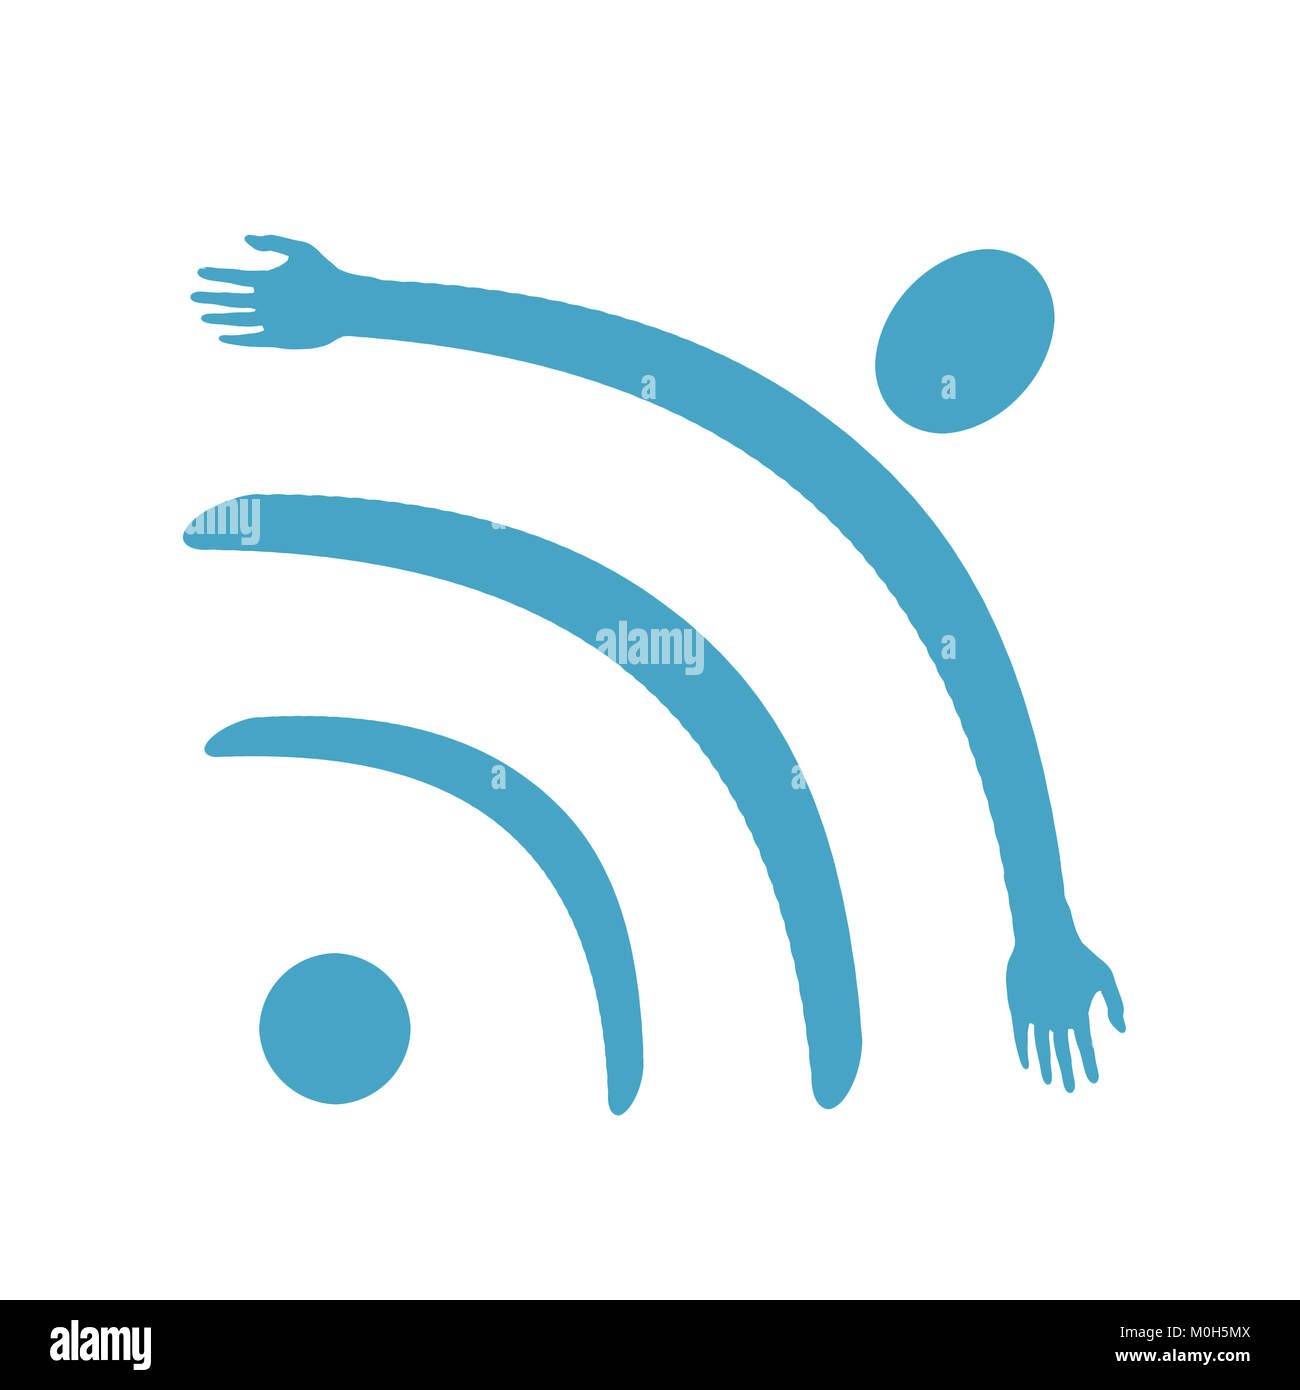 isolated wi fi symbol with flying human figure Stock Photo